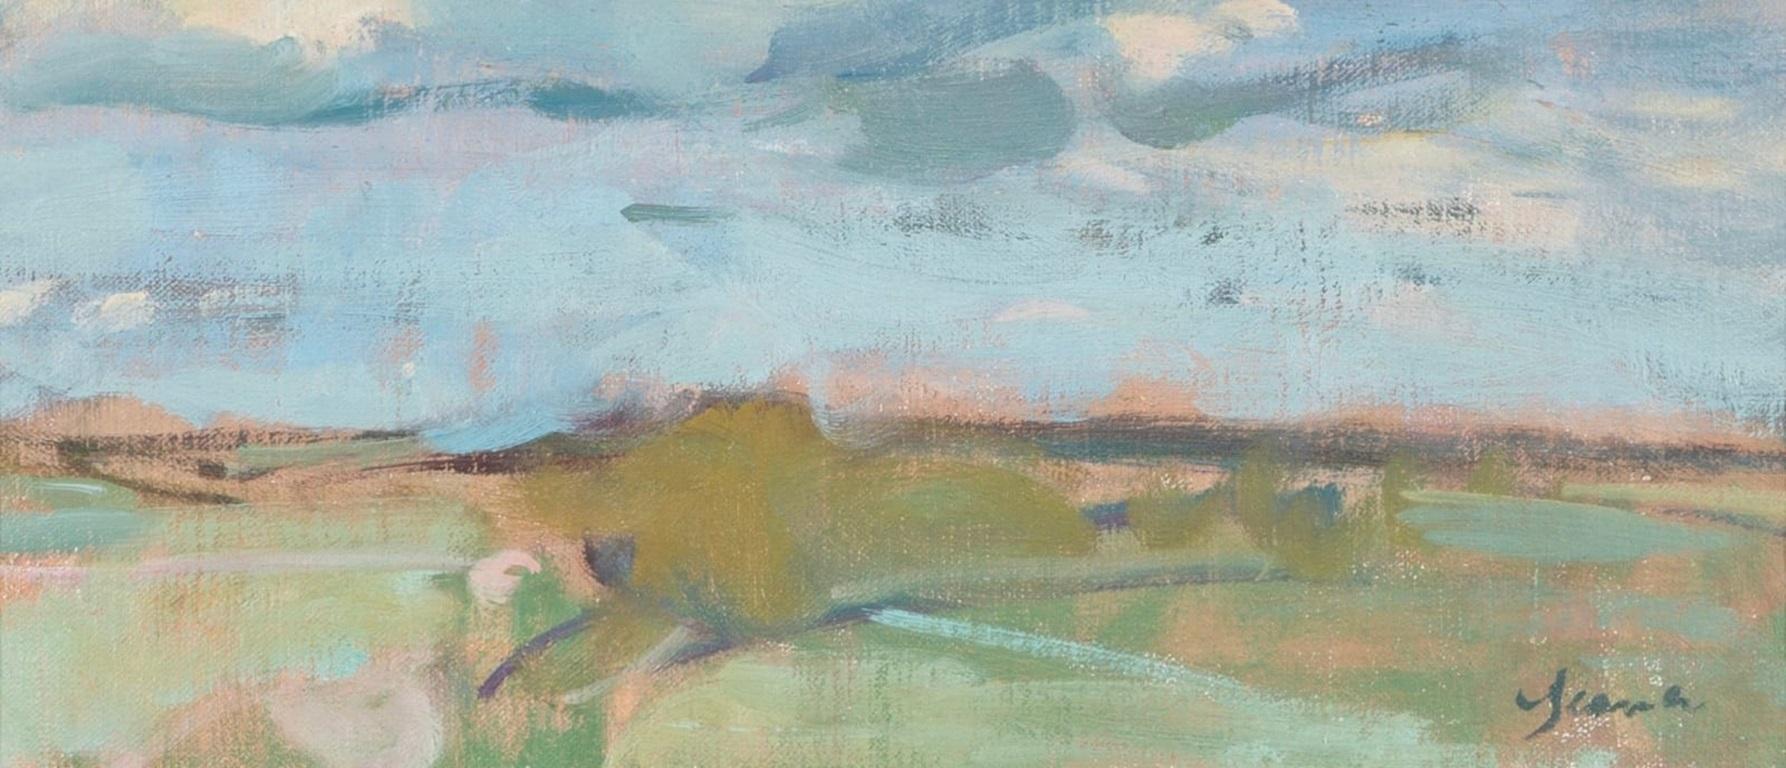 Late Summer above Chittern Painting by Martin Yeoman B. 1953

Additional information:
Medium: Oil on panel
Dimensions: 16 x 36 cm
6 1/4 x 14 1/8 in

Martin Yeoman was born in 1953, and studied with Peter Greenham at the Royal Academy Schools,